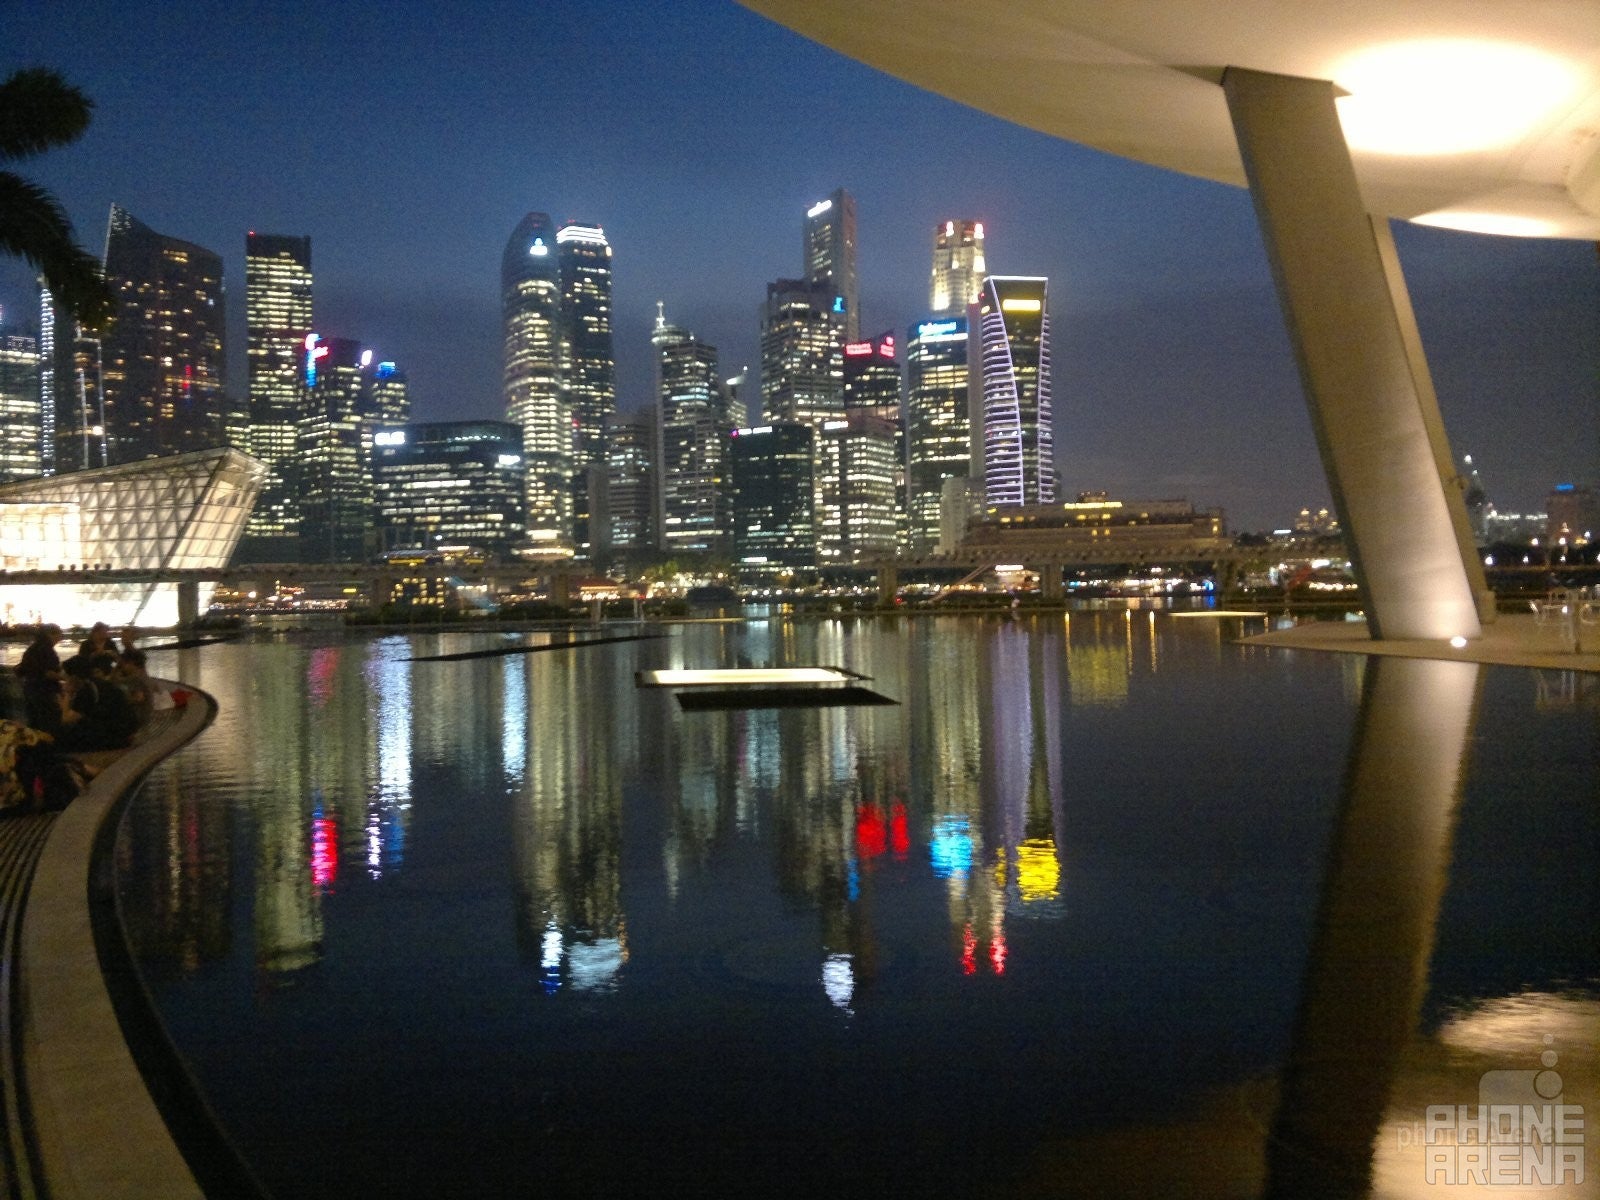 Edwin Adrianta - Nokia N8Marina Bay Sands at nightLast time&#039;s winner - Cool images, taken with your cell phone #40